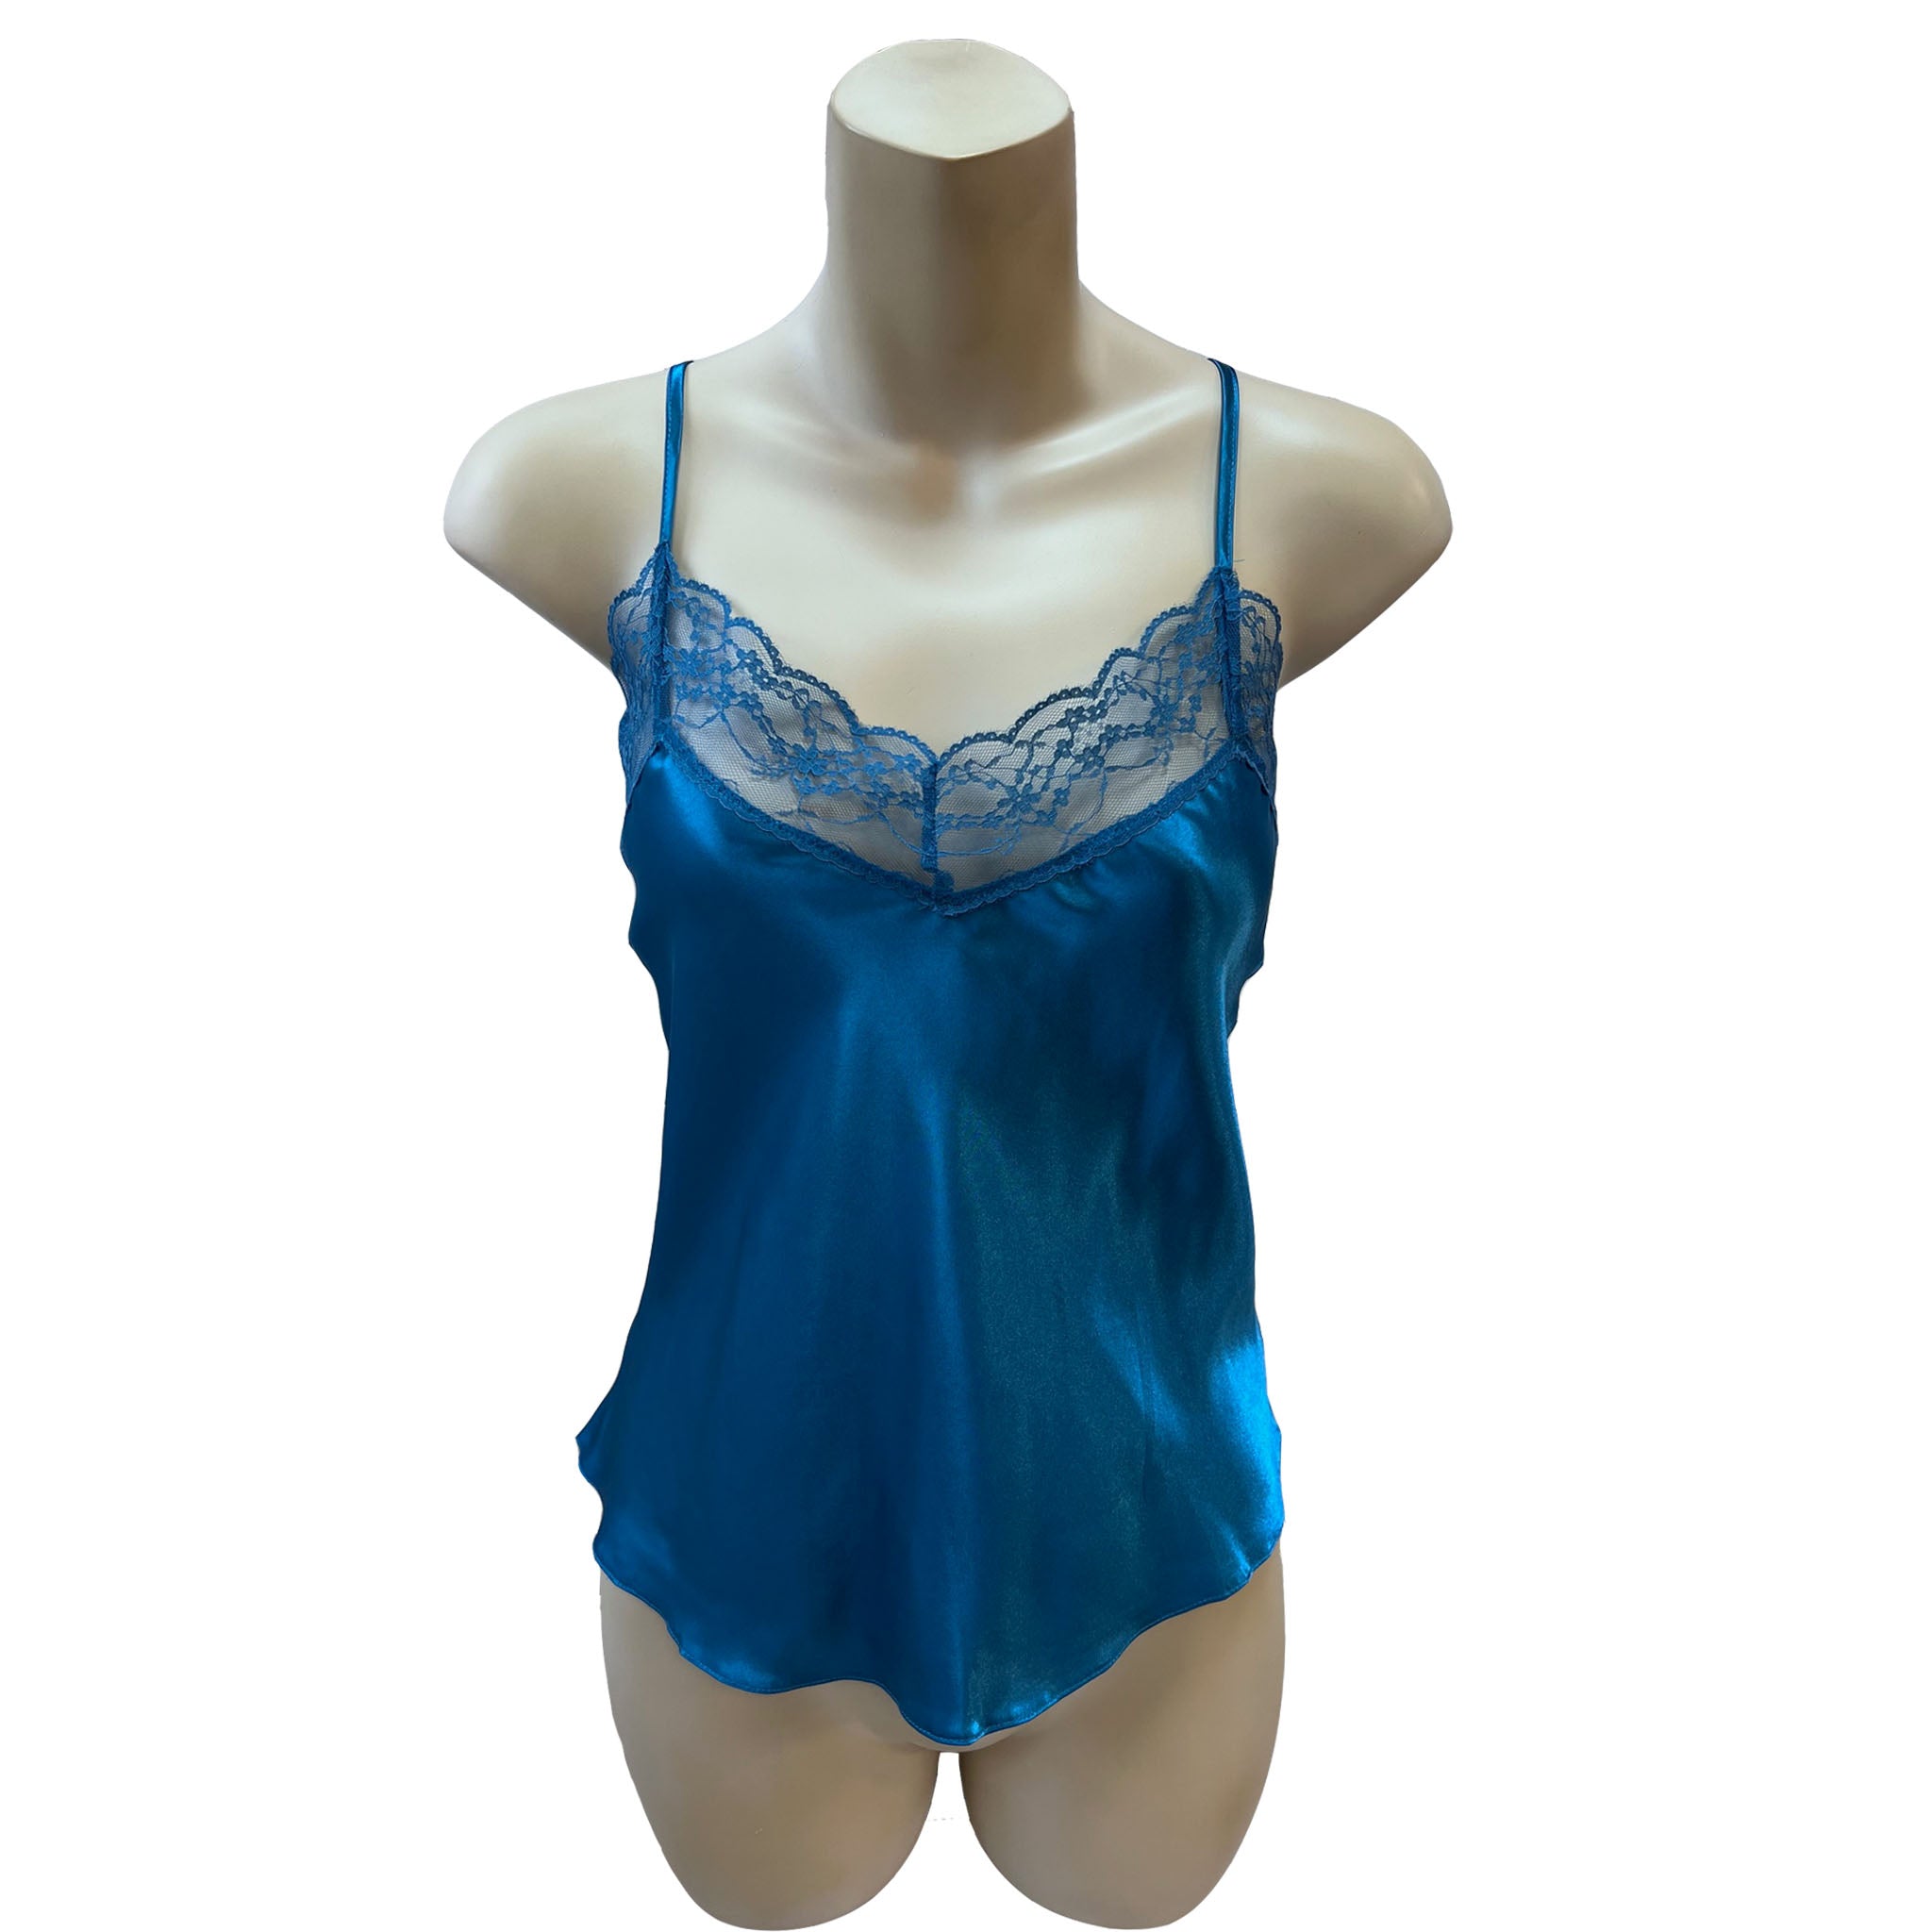 LACE TOP NEGLIGEE